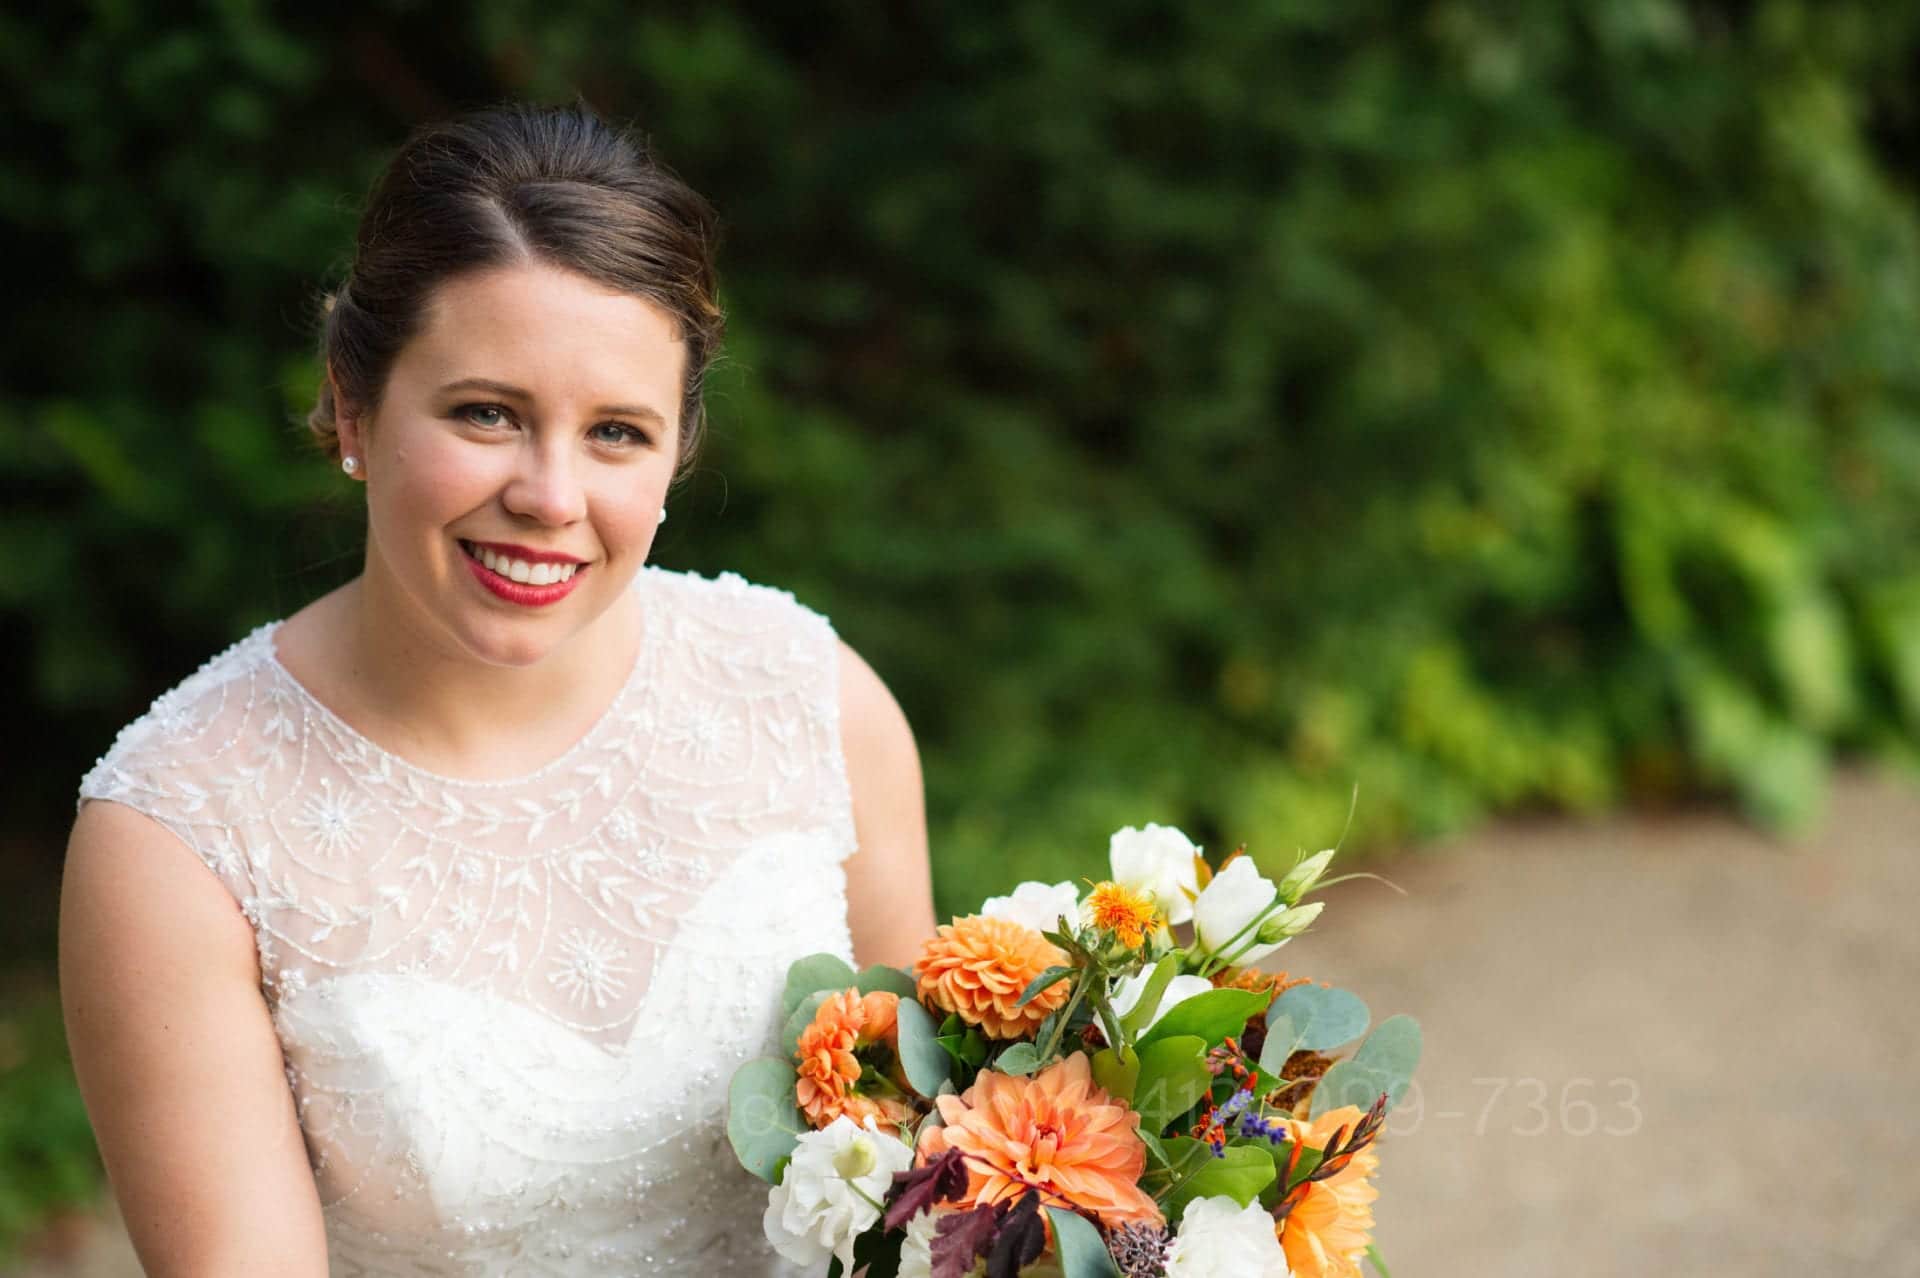 Portrait of a smiling bride holding a bouquet with an out of focus green background.